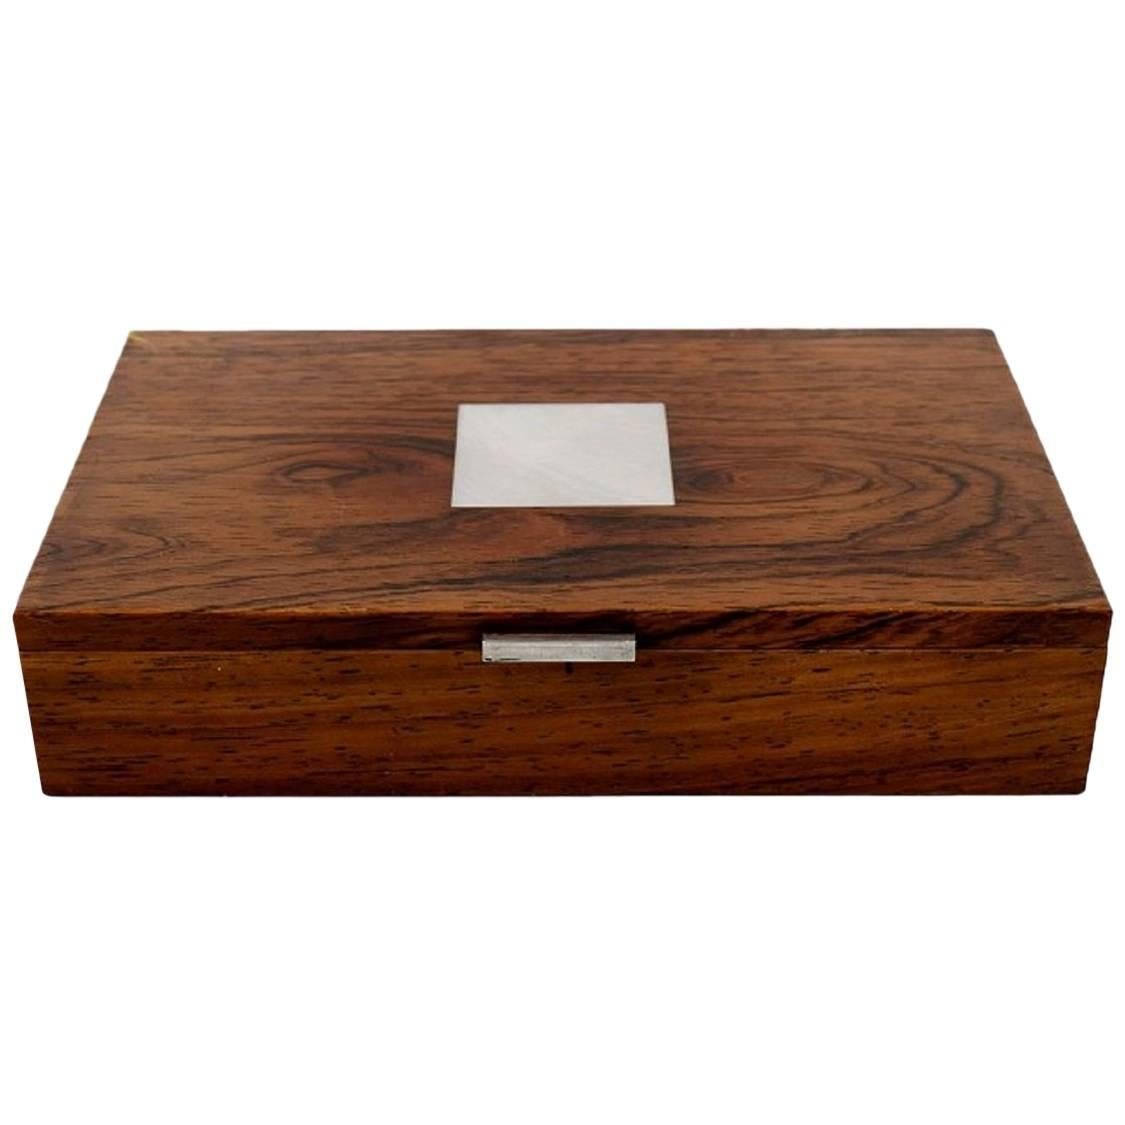 Hans Hansen, Casket or Box in Rosewood Inlaid with Silver, Mid-20th Century